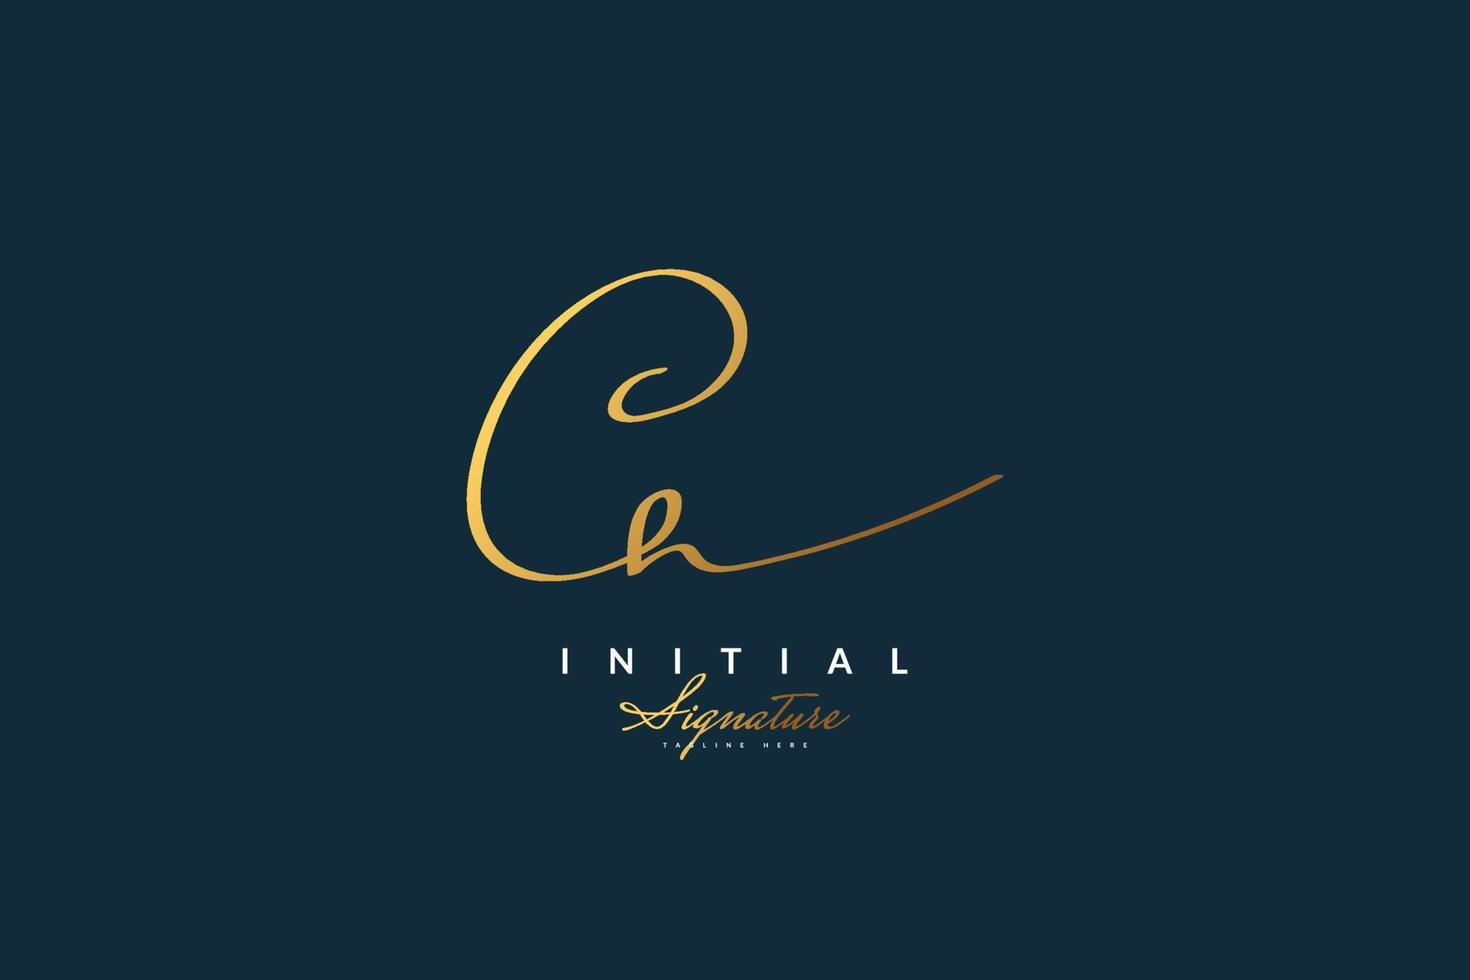 CH Initial Signature Logo or Symbol with Handwriting Style for Wedding, Fashion, Jewelry, Boutique, Botanical, Floral and Business Identity vector